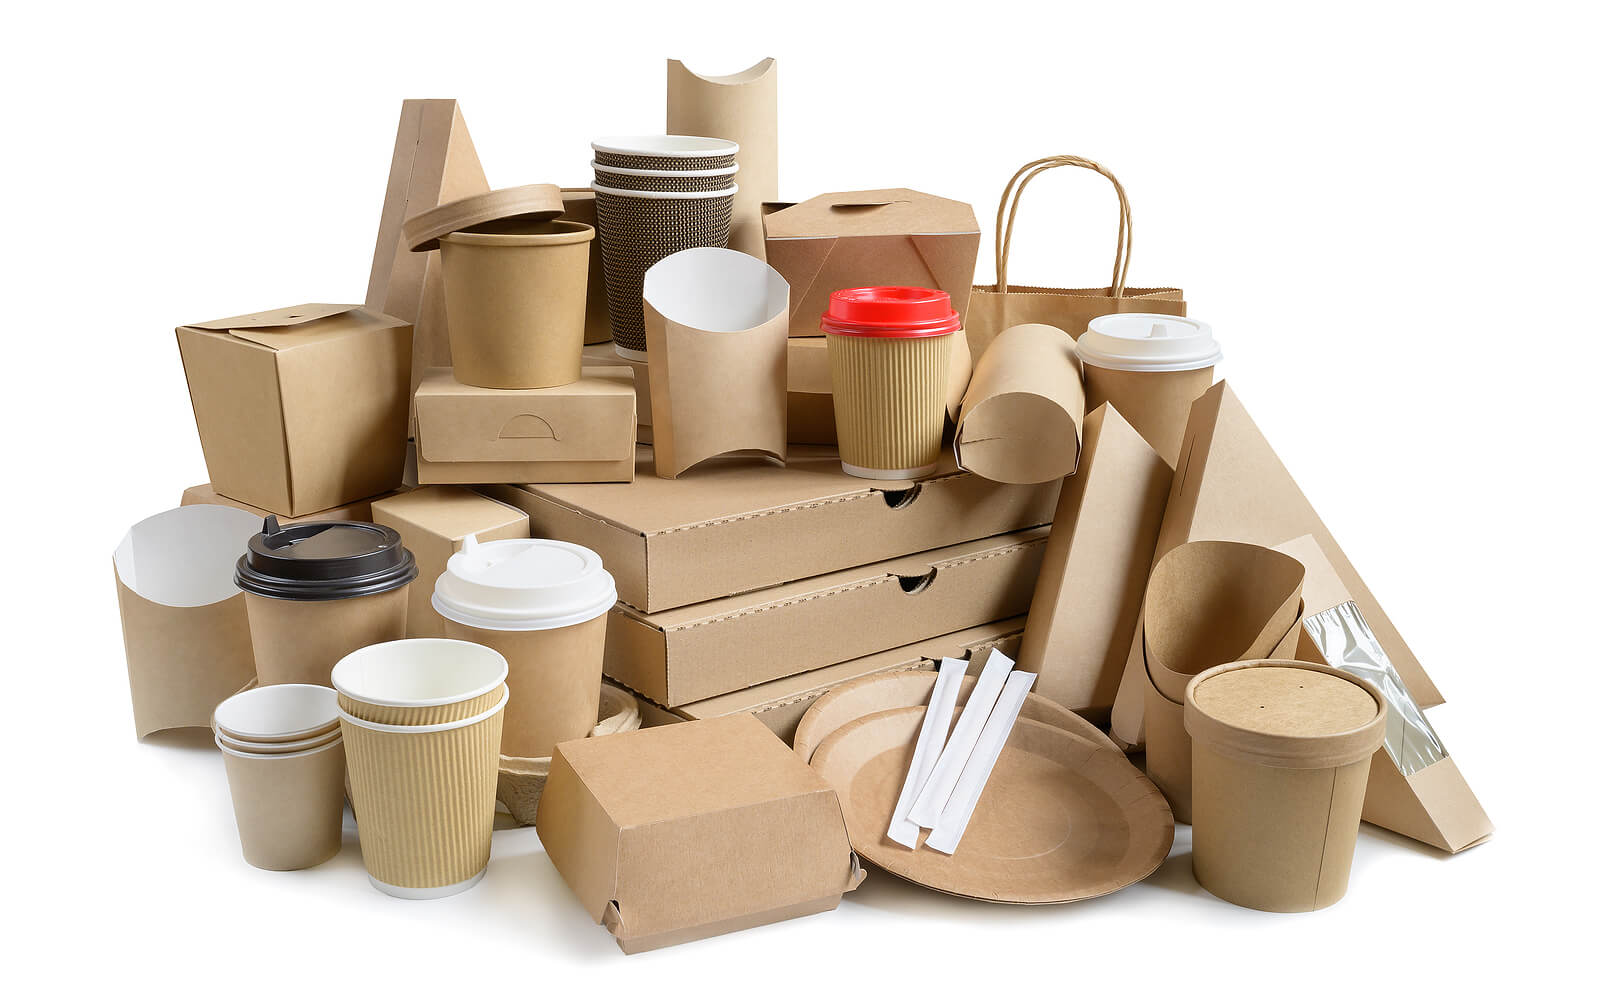 Recyclable beverage and takeaway cartons.